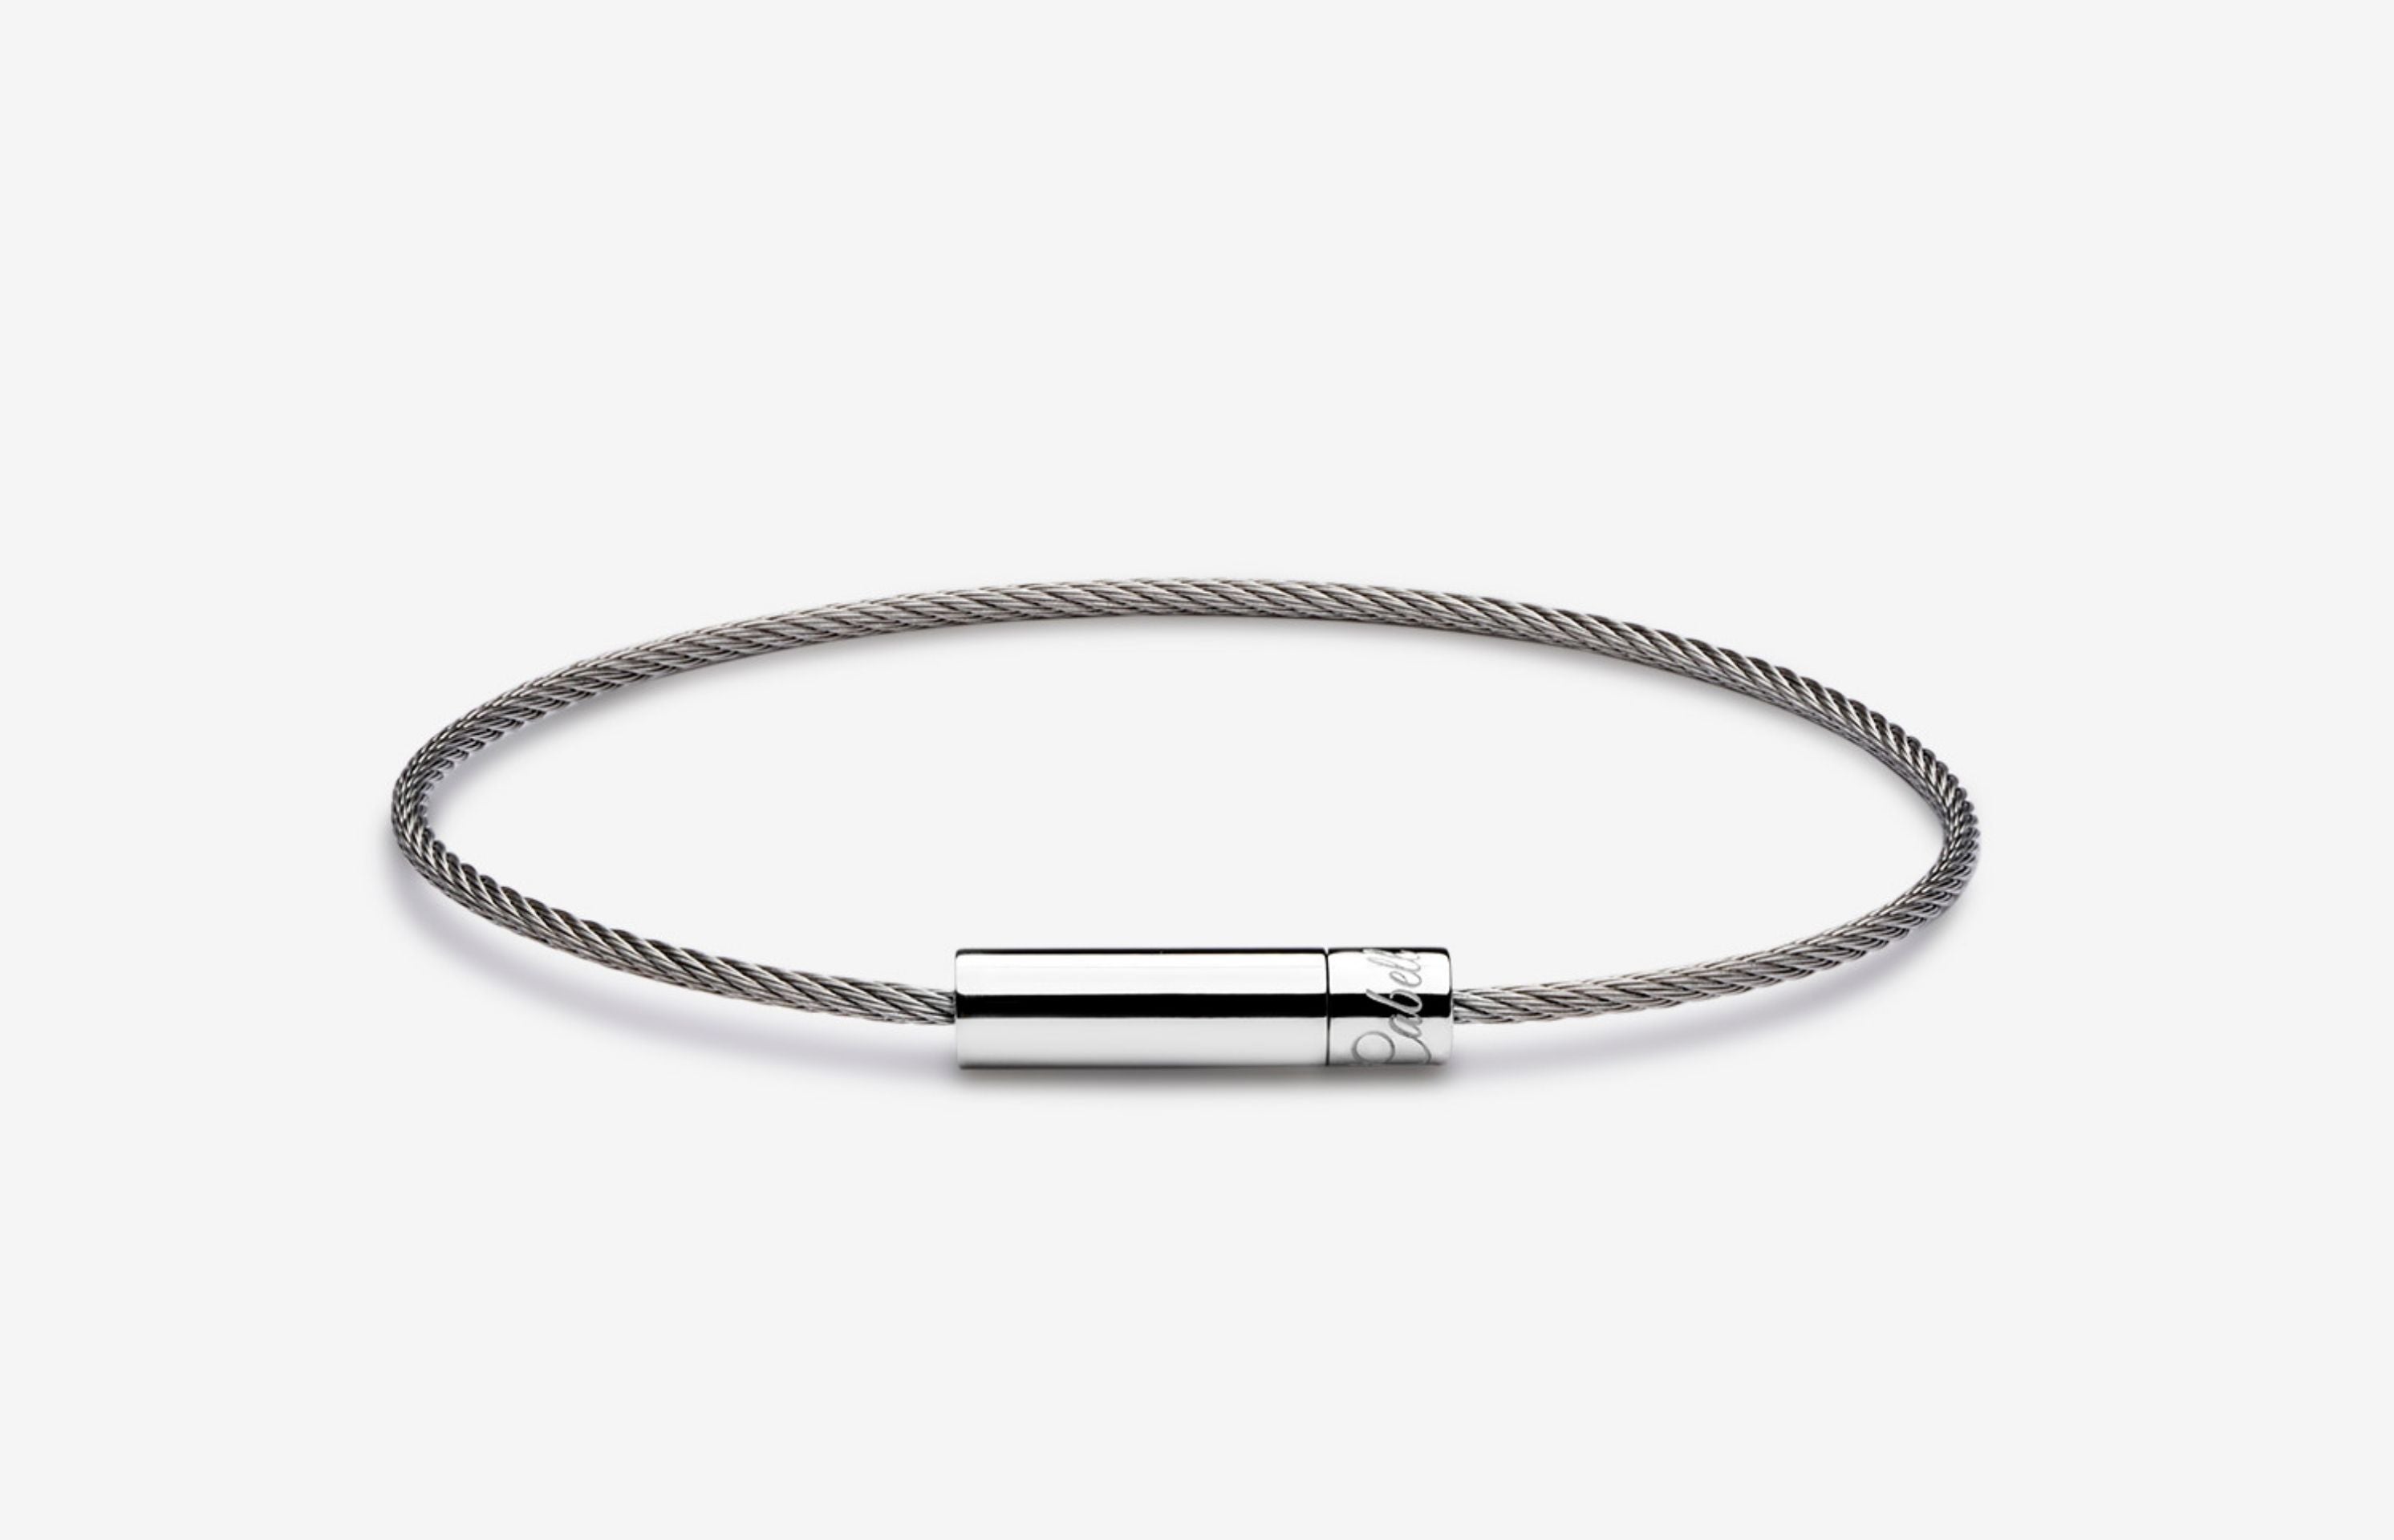 Michael Cable Bracelet  Silver - Oliver Cabell